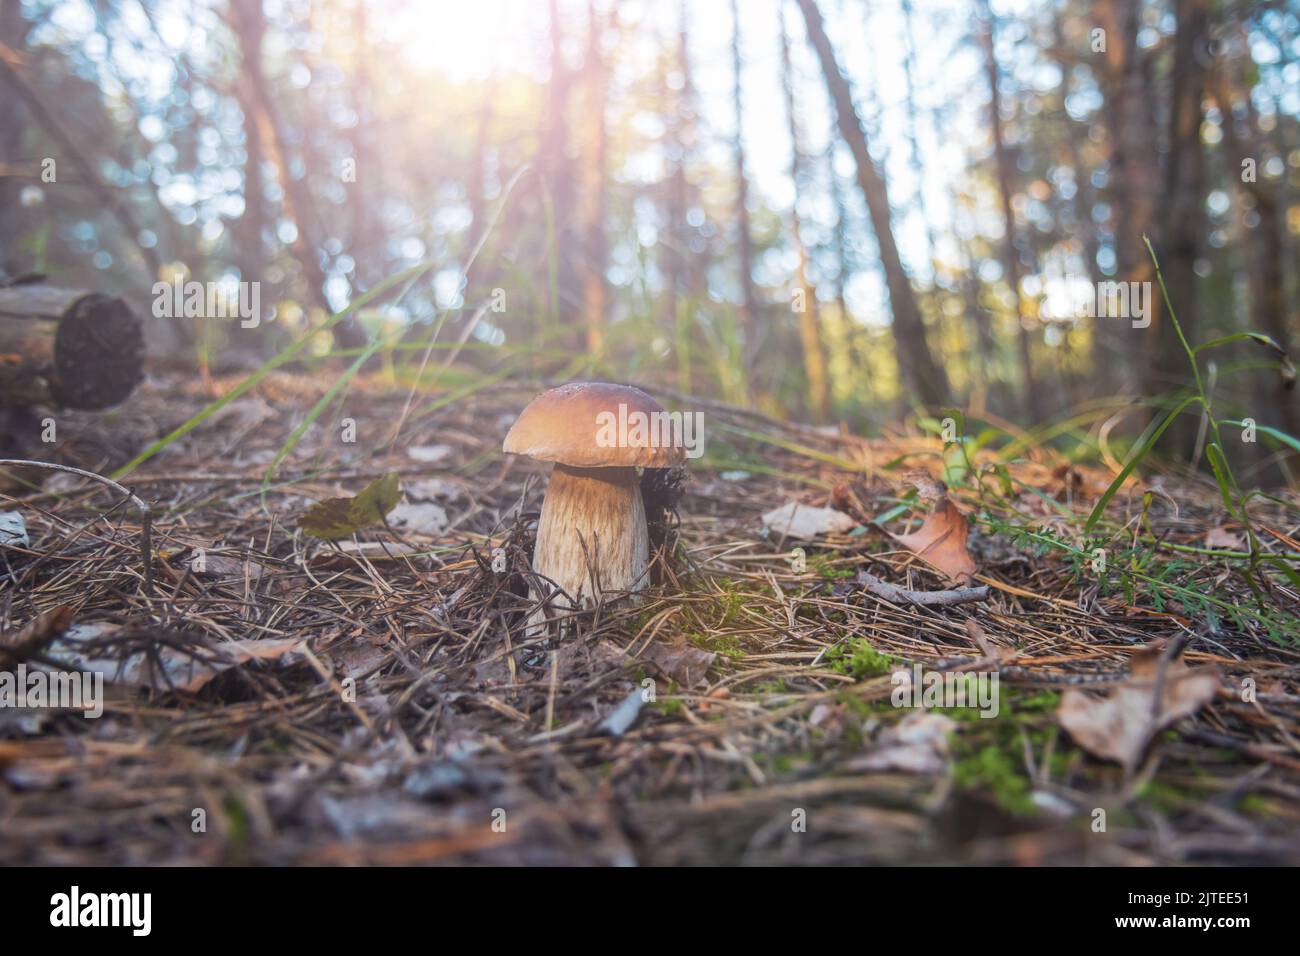 mushroom in the autumn forest Stock Photo